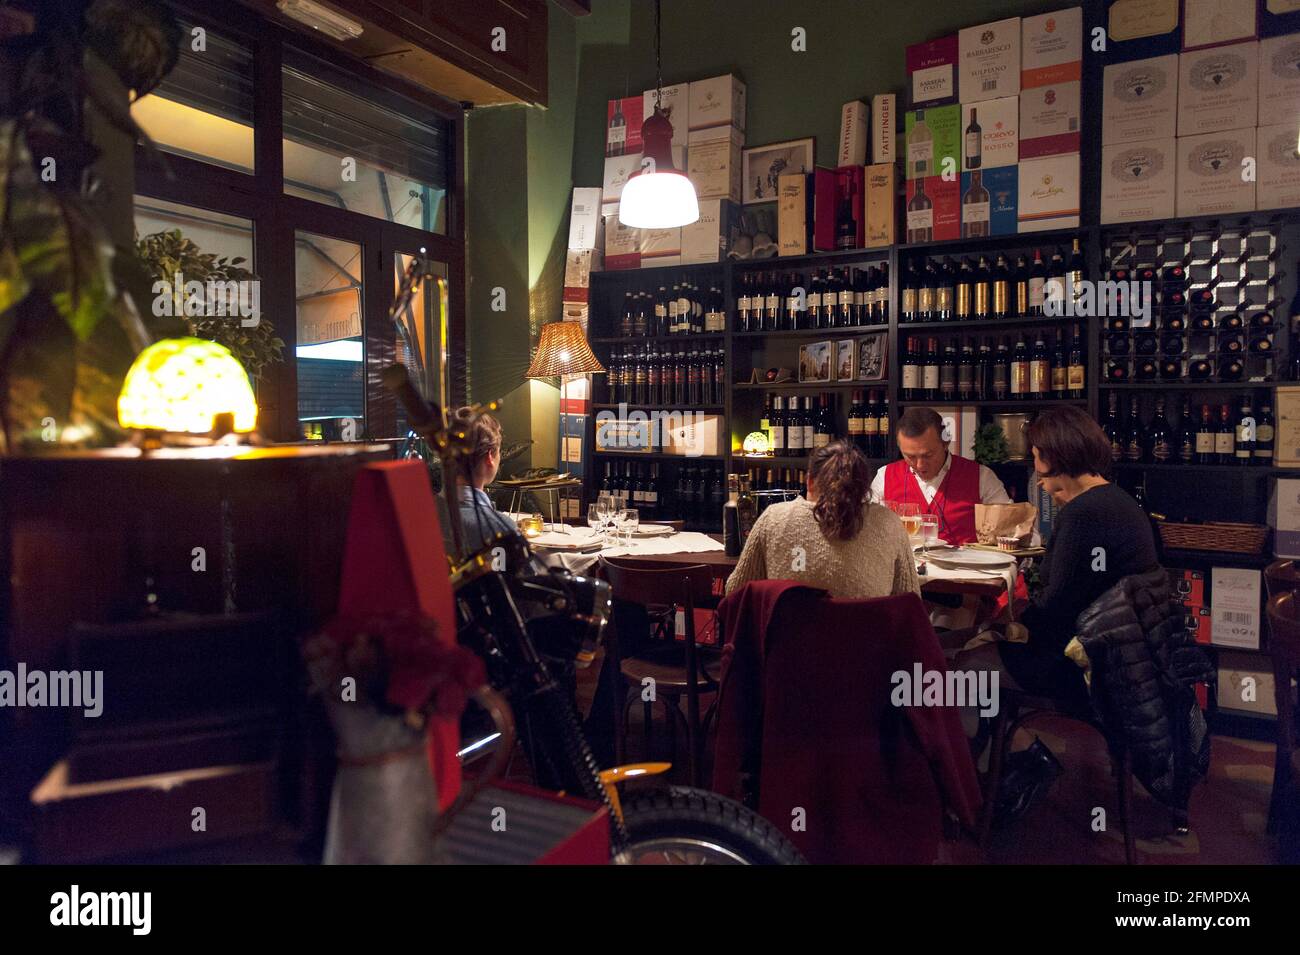 Interiors of the Restaurant Damm atra located in Milano, during a typical working evening while customers eat and drink at the tables, Milan, Italy, L Stock Photo